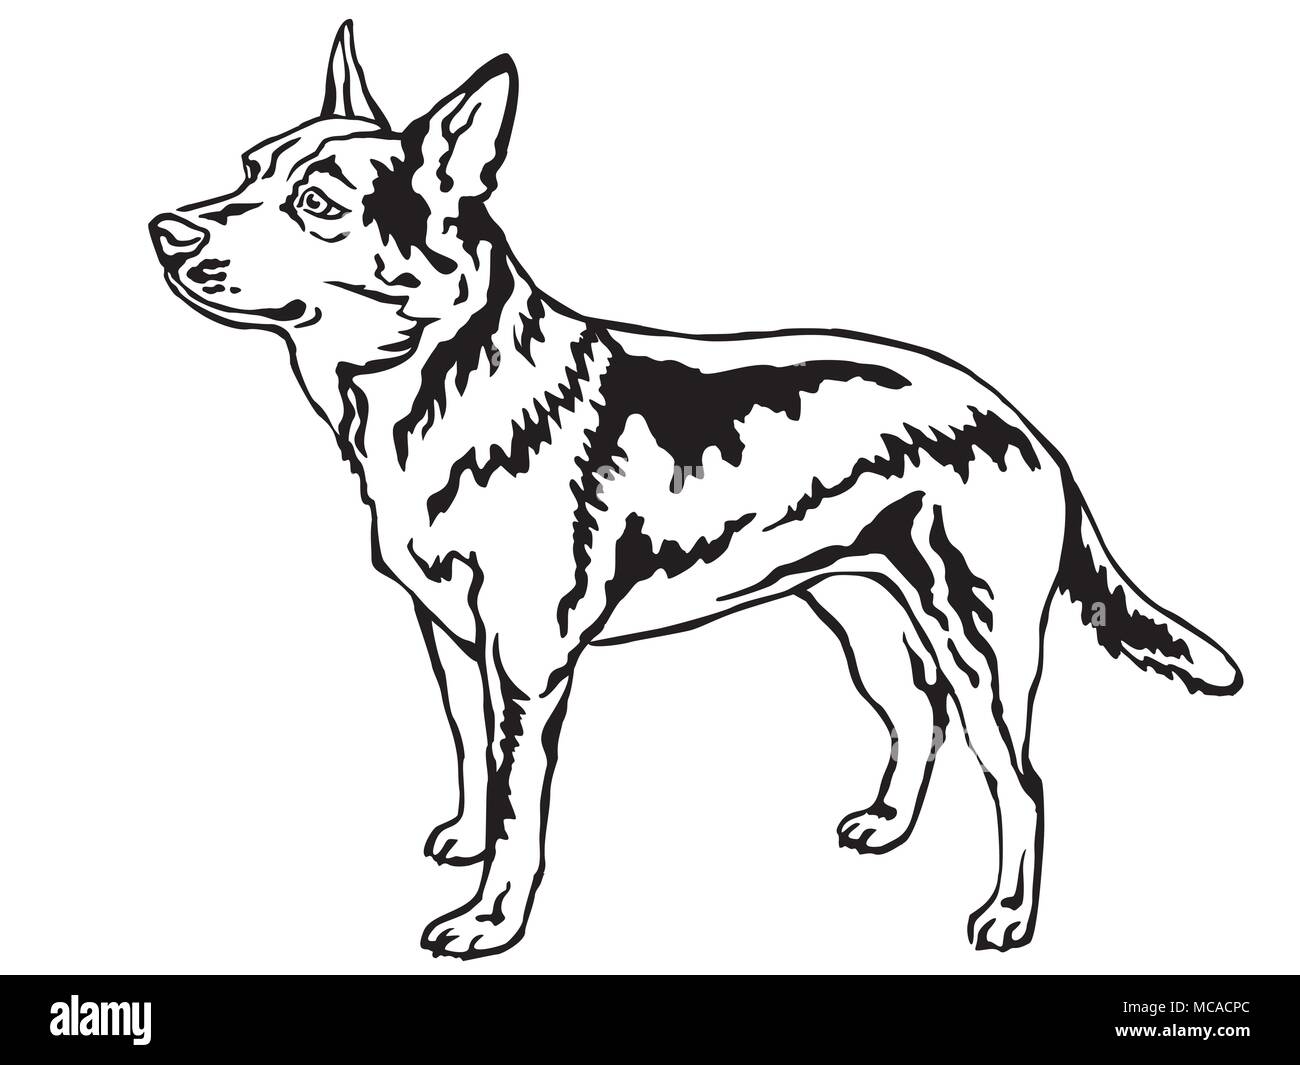 Decorative portrait of standing in profile Australian Cattle Dog, vector isolated illustration in black color on white background Stock Vector